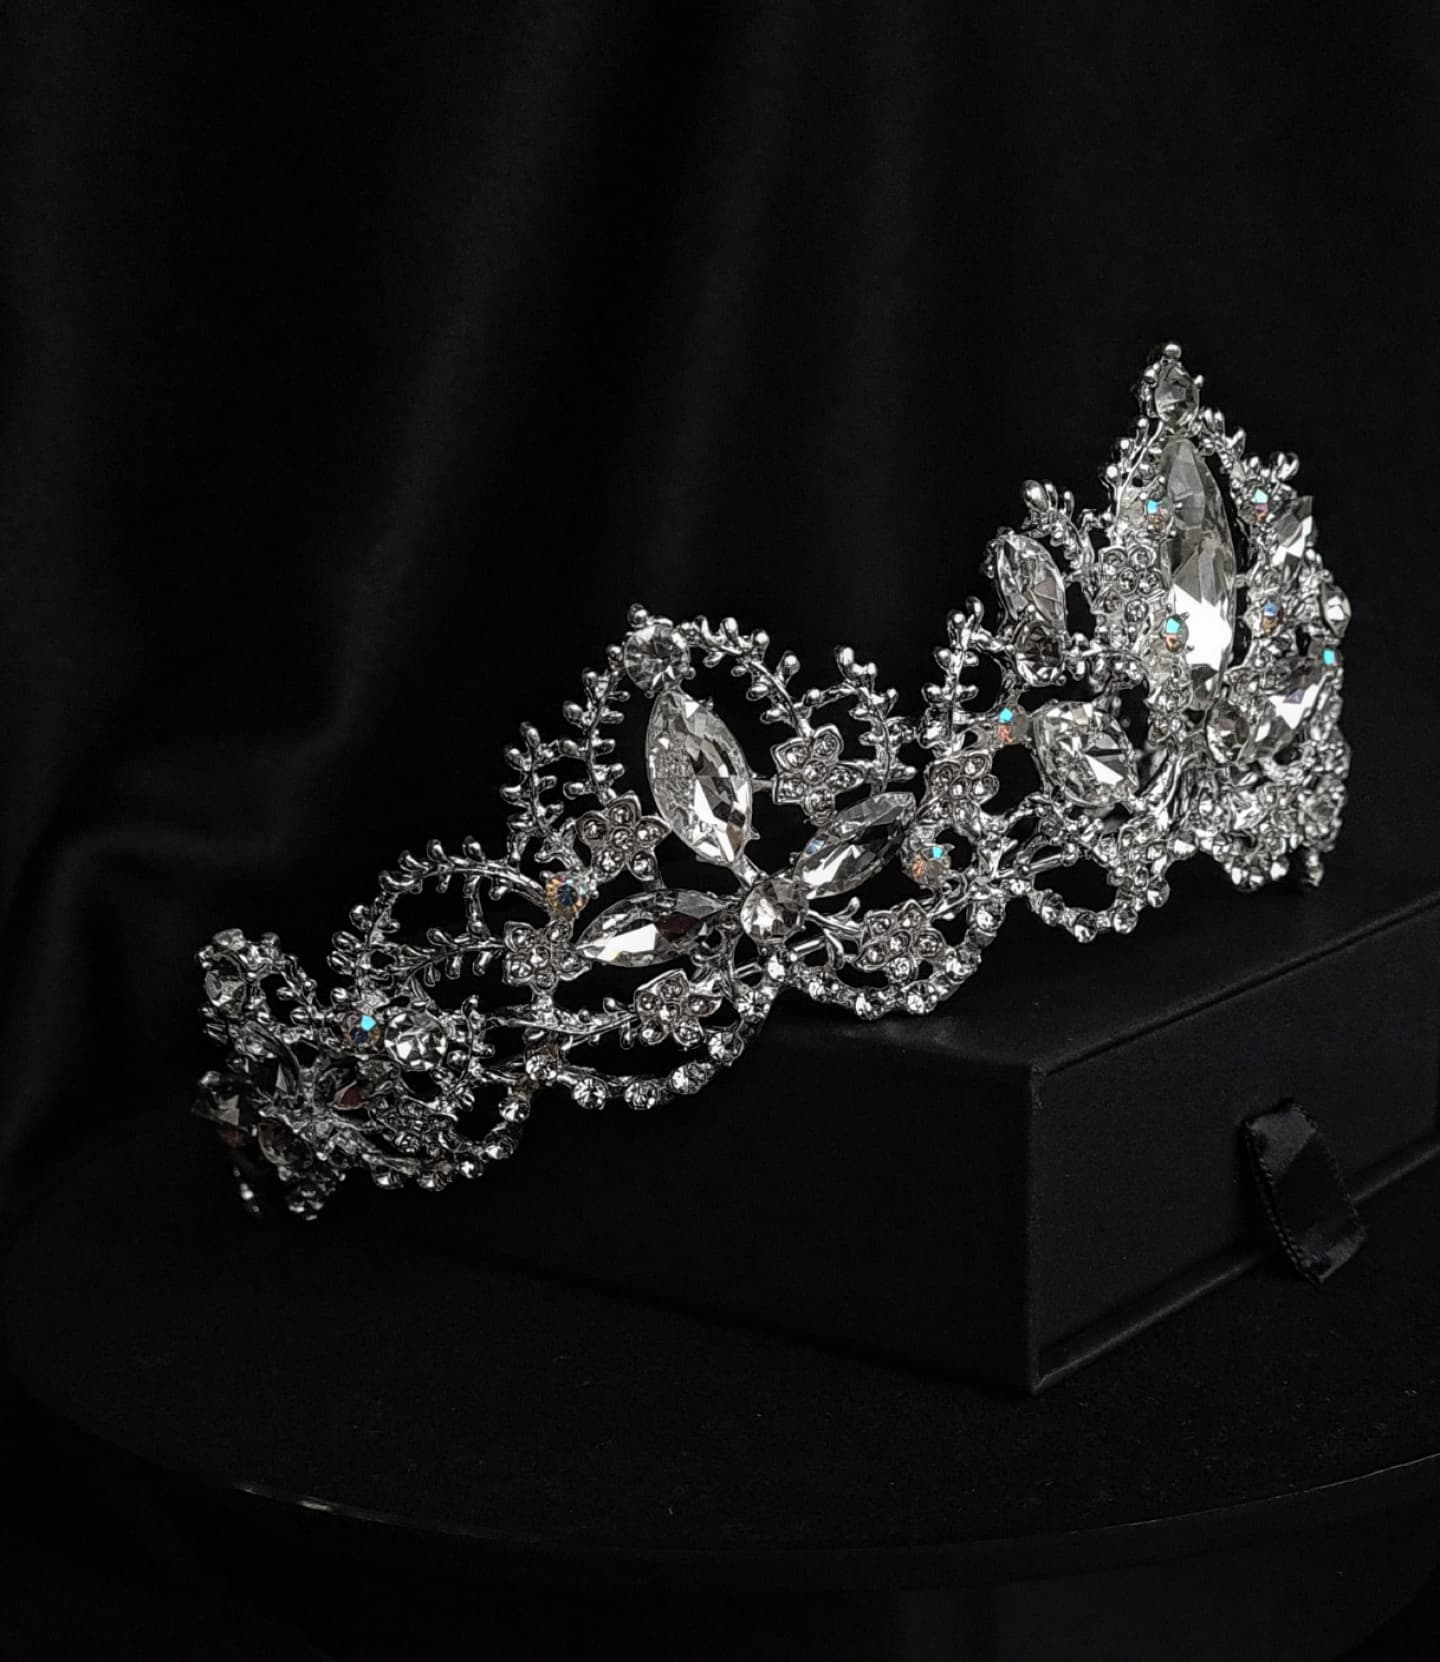  A tiara with rhinestones on a black box. The tiara is made of silver and features a delicate design with cascading rhinestones. The rhinestones are clear and sparkling. The tiara is sitting on top of a black box.